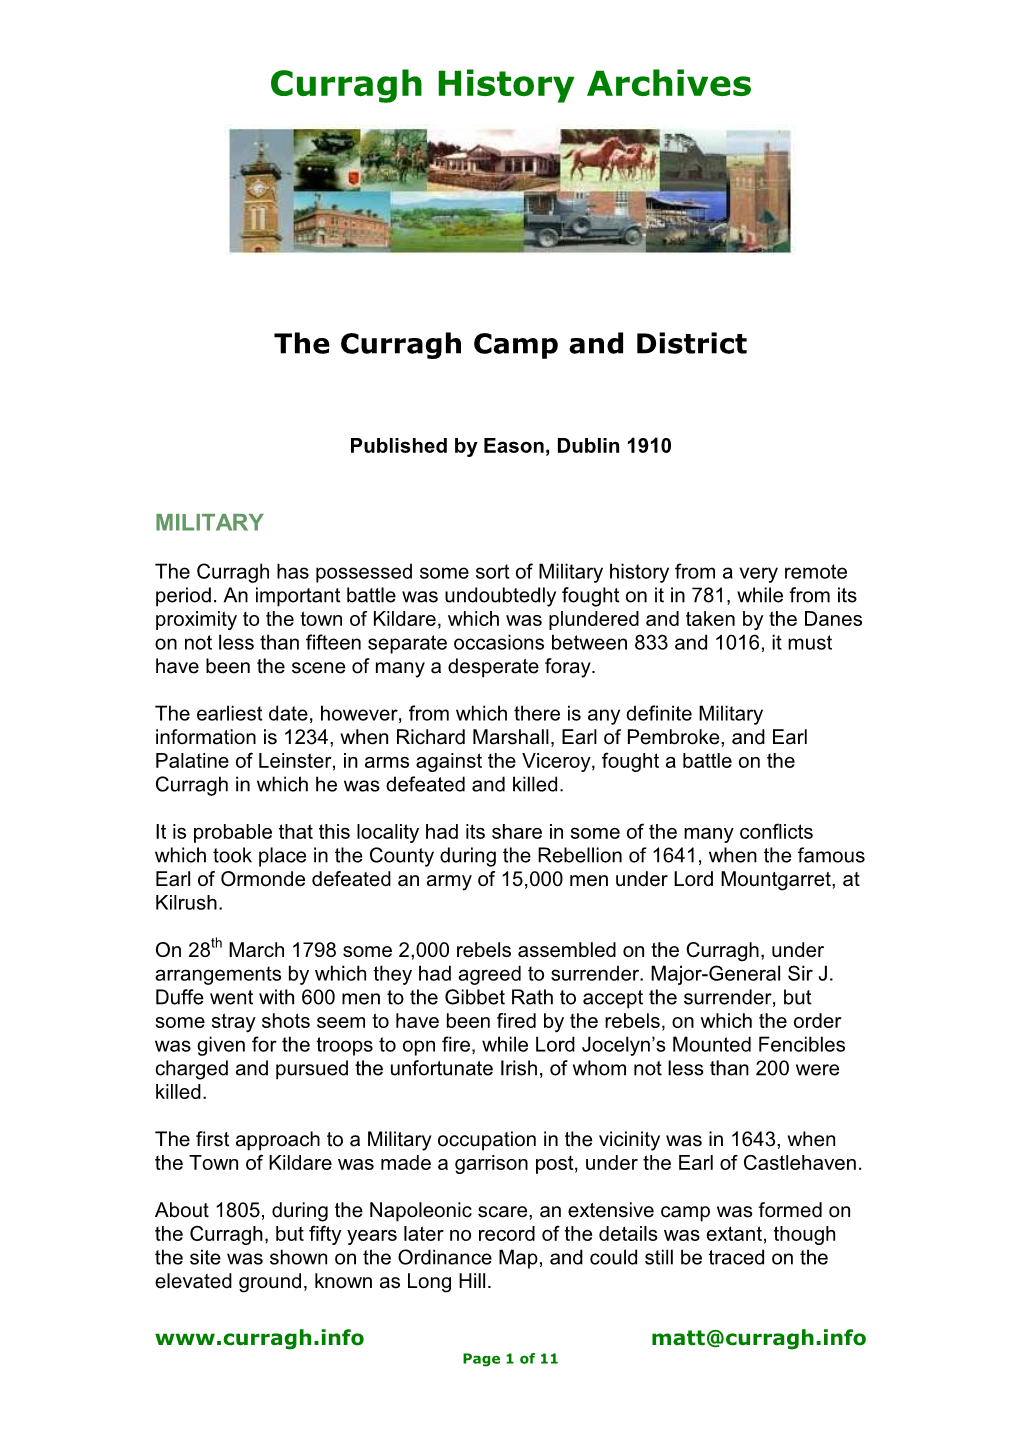 The Curragh Camp and District